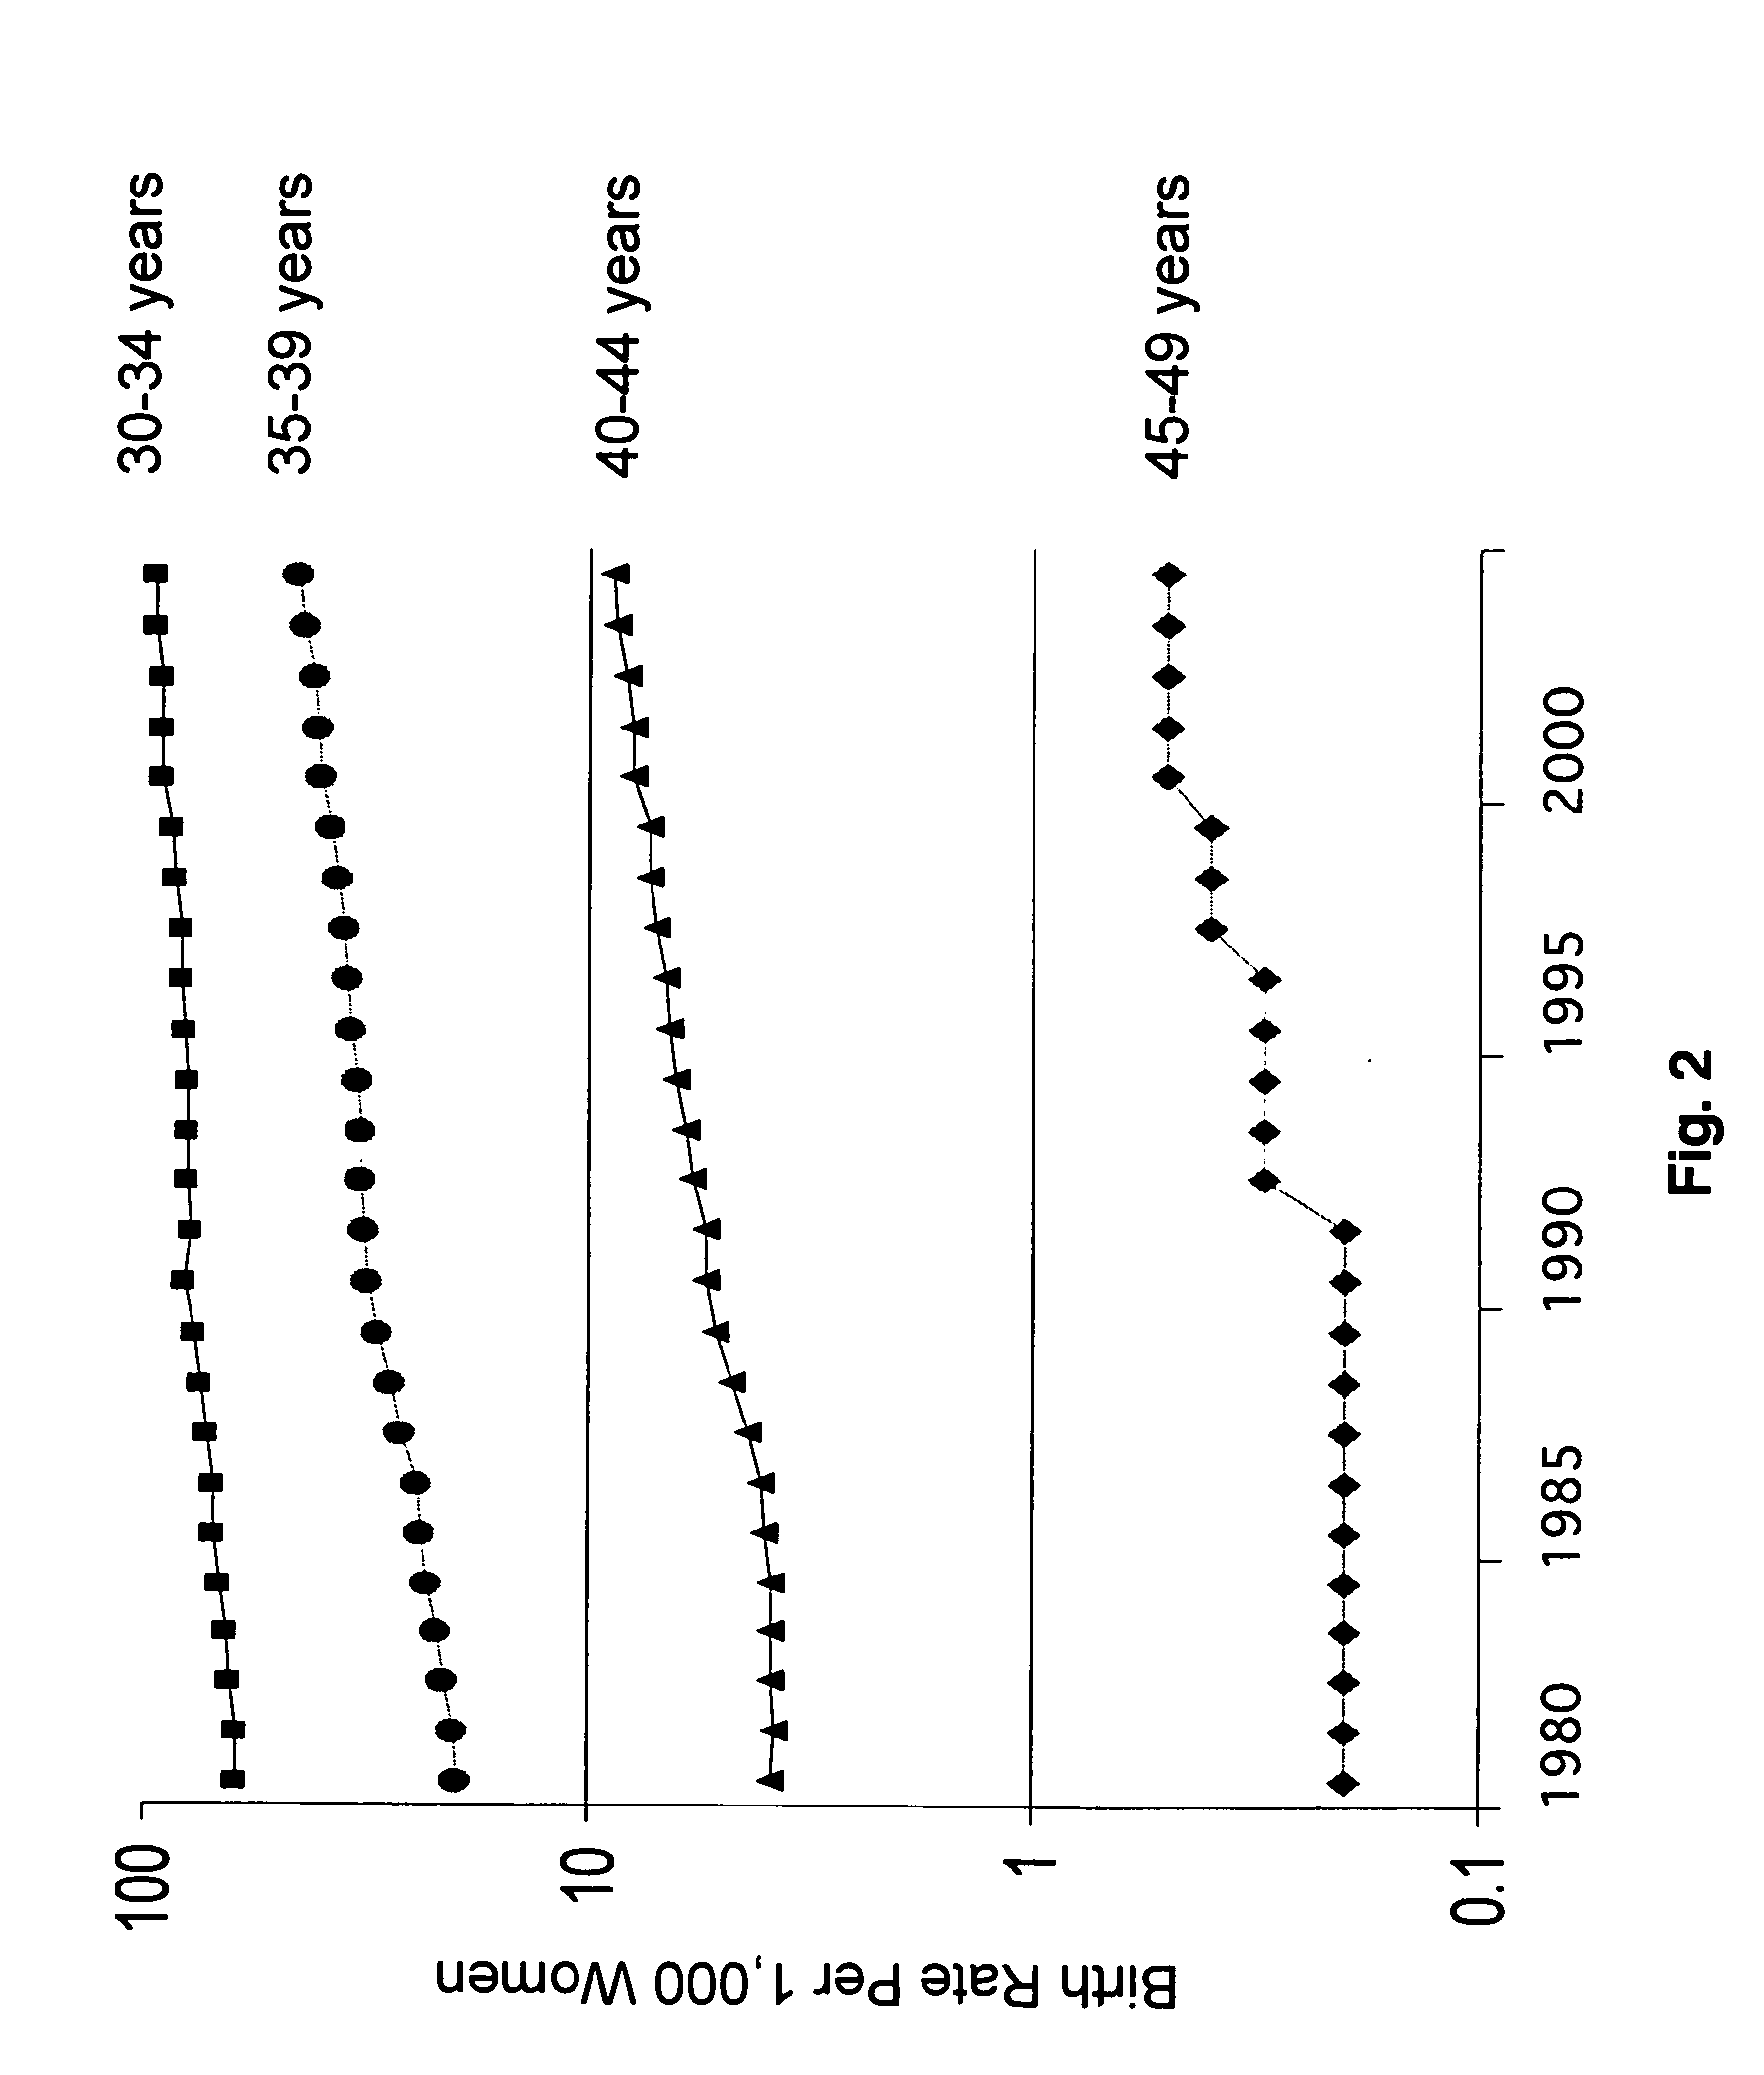 Hormone normalization therapy and uses therefor